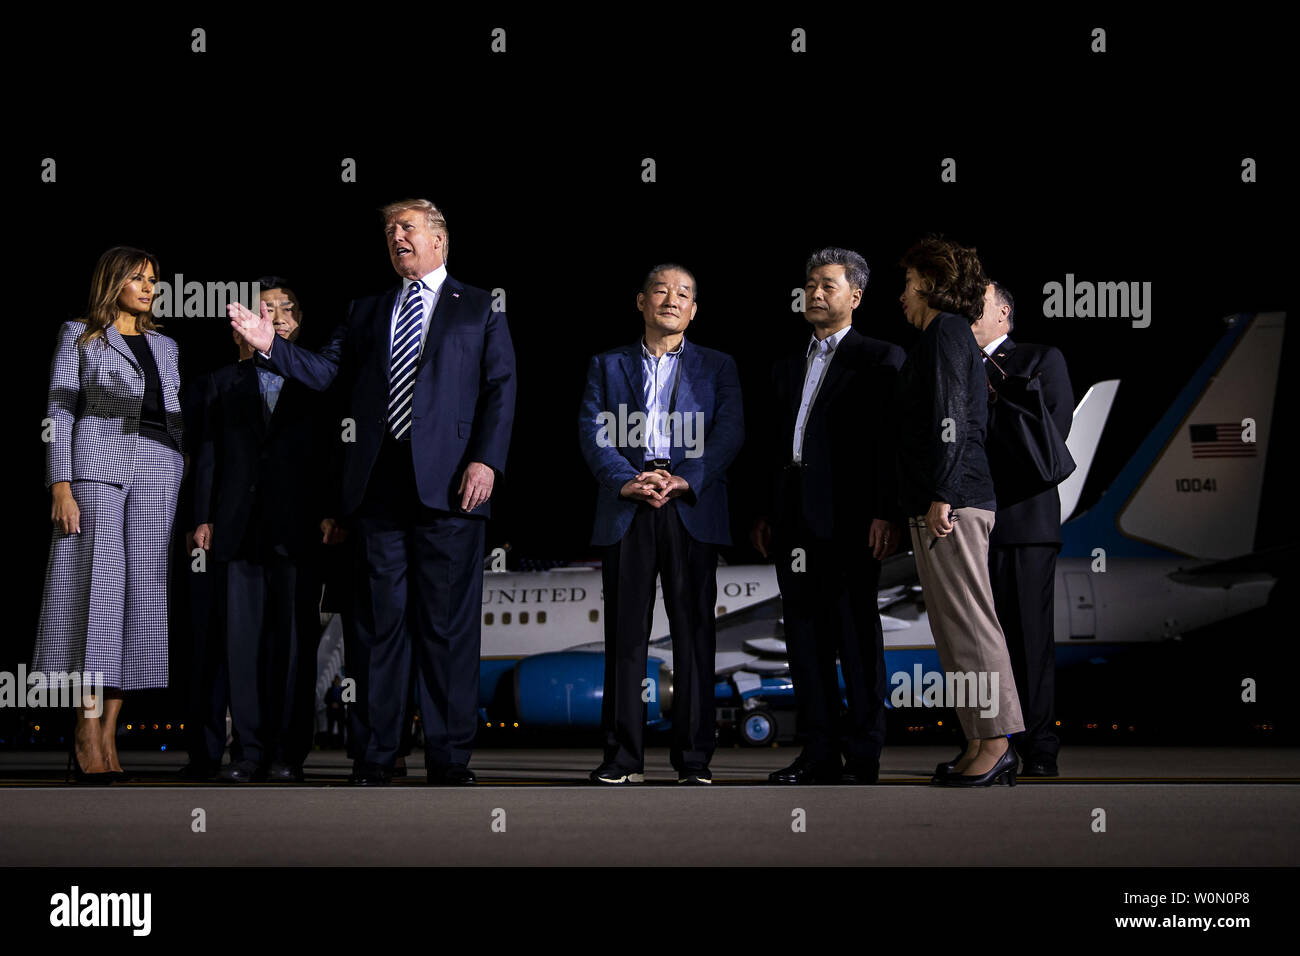 President Donald Trump walks on the tarmac with the three American citizens Kim Hak-Song, Kim Dong-Chul, and Kim Sang-Duk, who were detained in North Korea, at Joint Base Andrews in Maryland on May 10, 2018. Photo by Al Drago/UPI Stock Photo